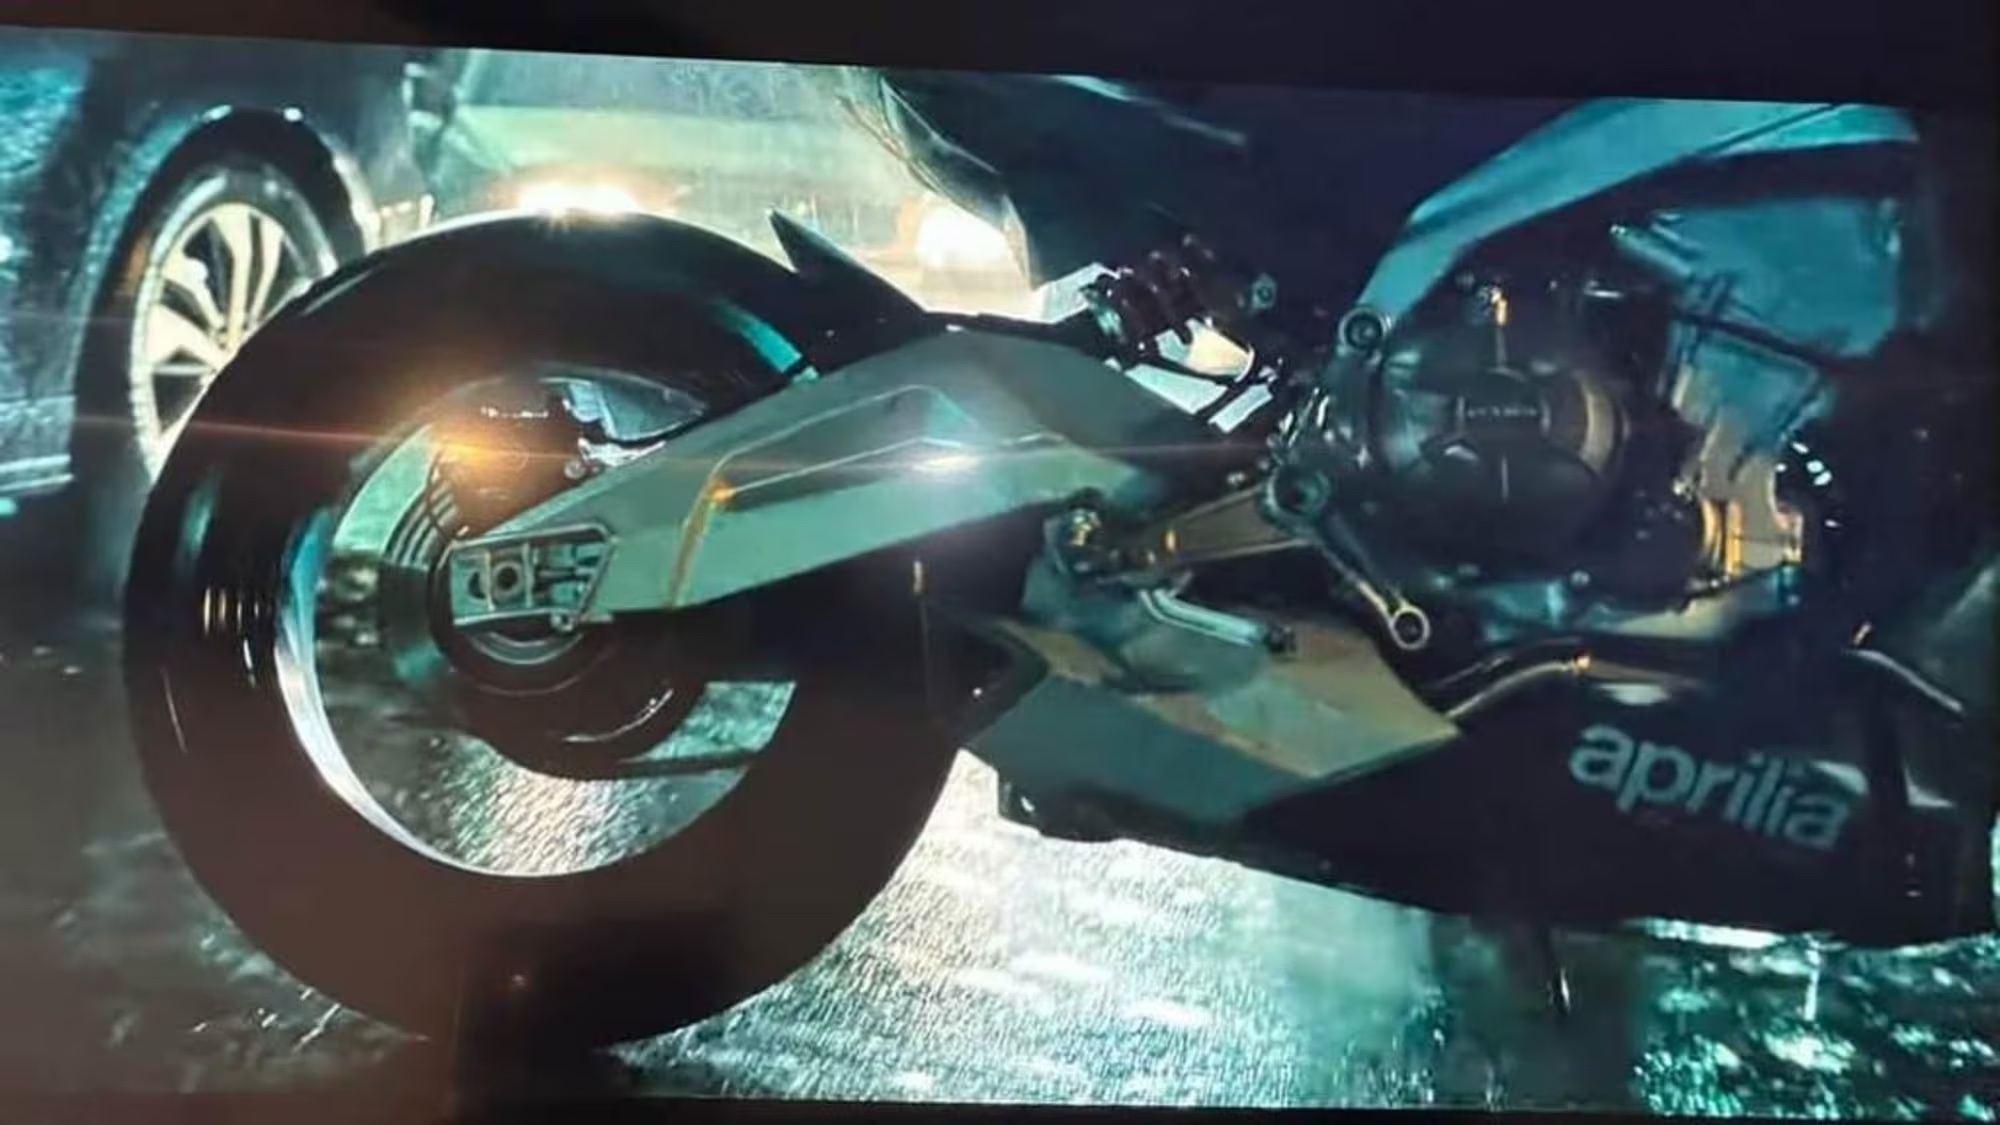 The Aprilia Tuono featured in "John Wick: Chapter 4" (2023). Media sourced from Youtube.